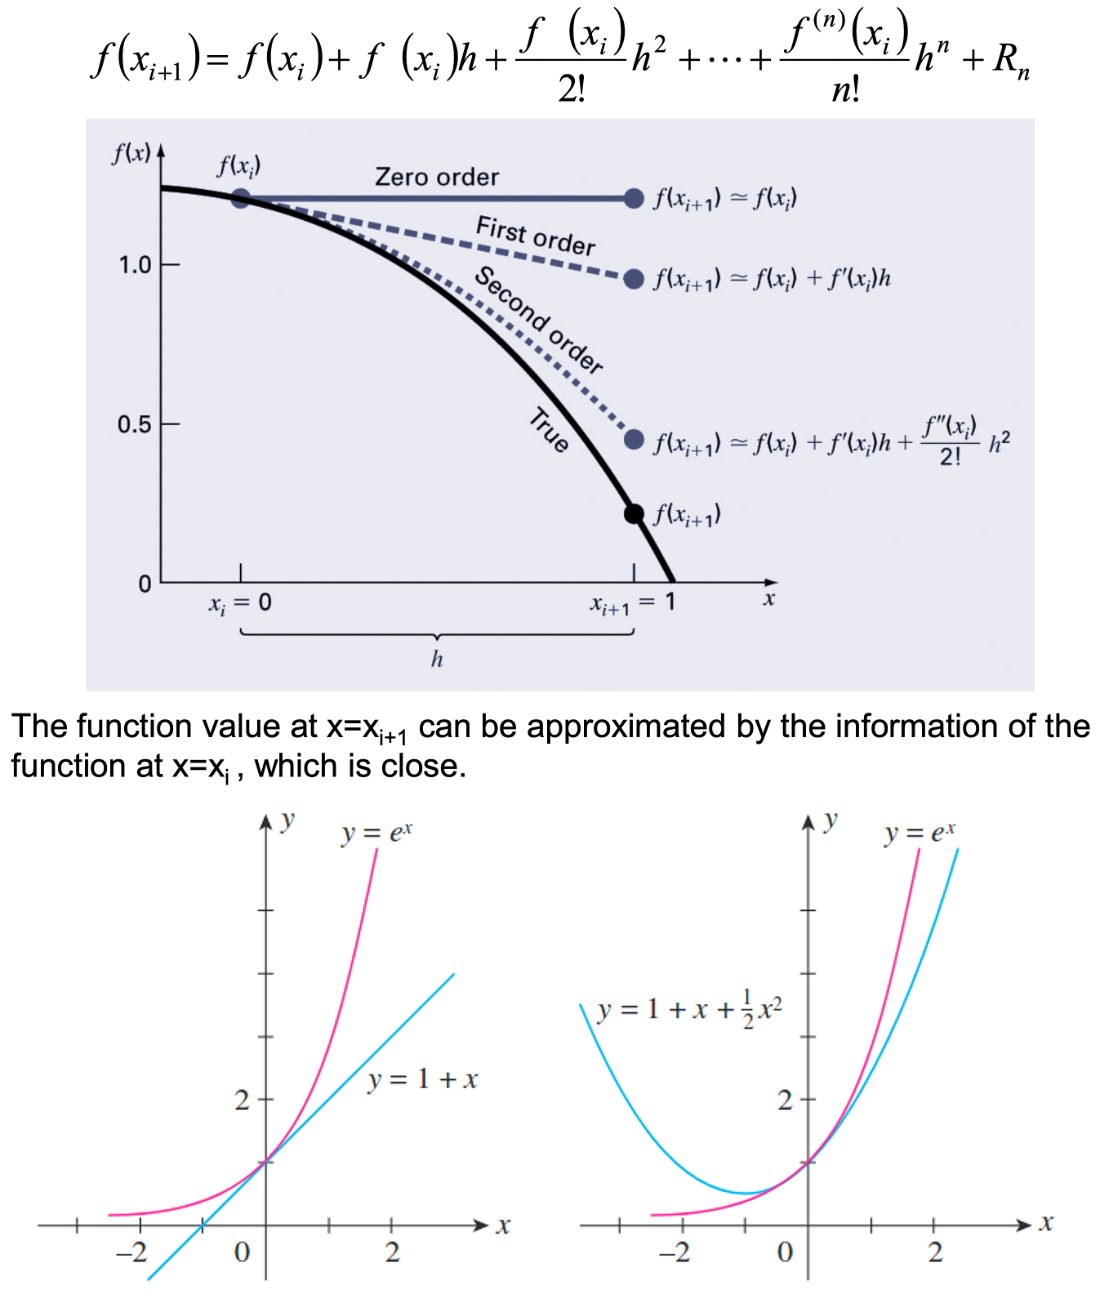 taylor_series_approximation_fig